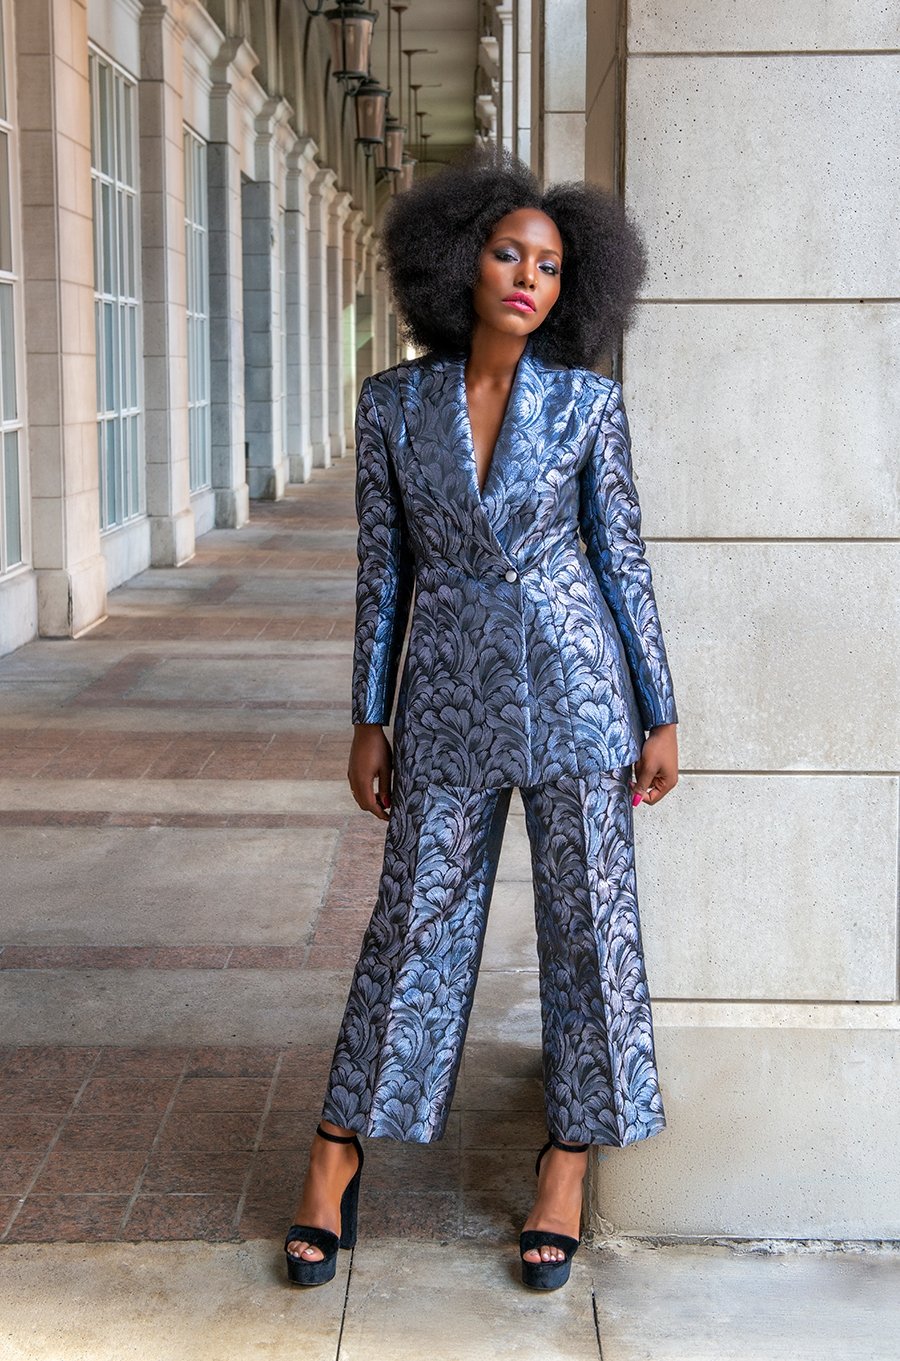 Enyo silver-blue meandering single-breasted suit. Wide leg pants